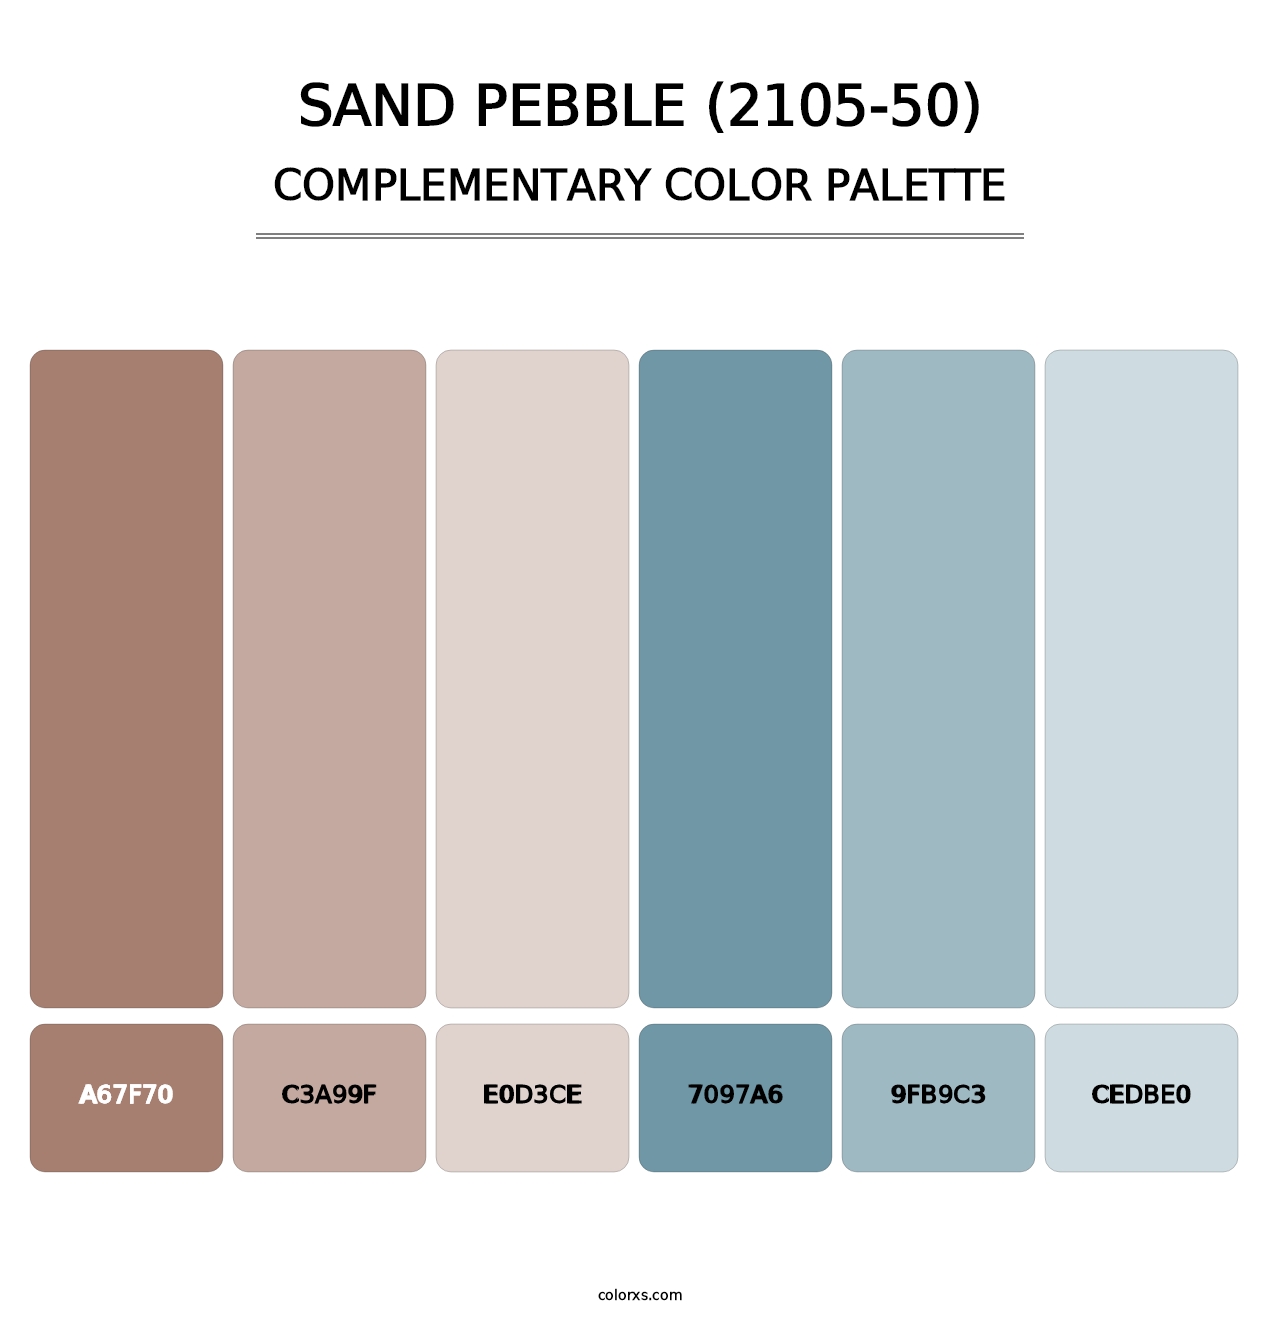 Sand Pebble (2105-50) - Complementary Color Palette